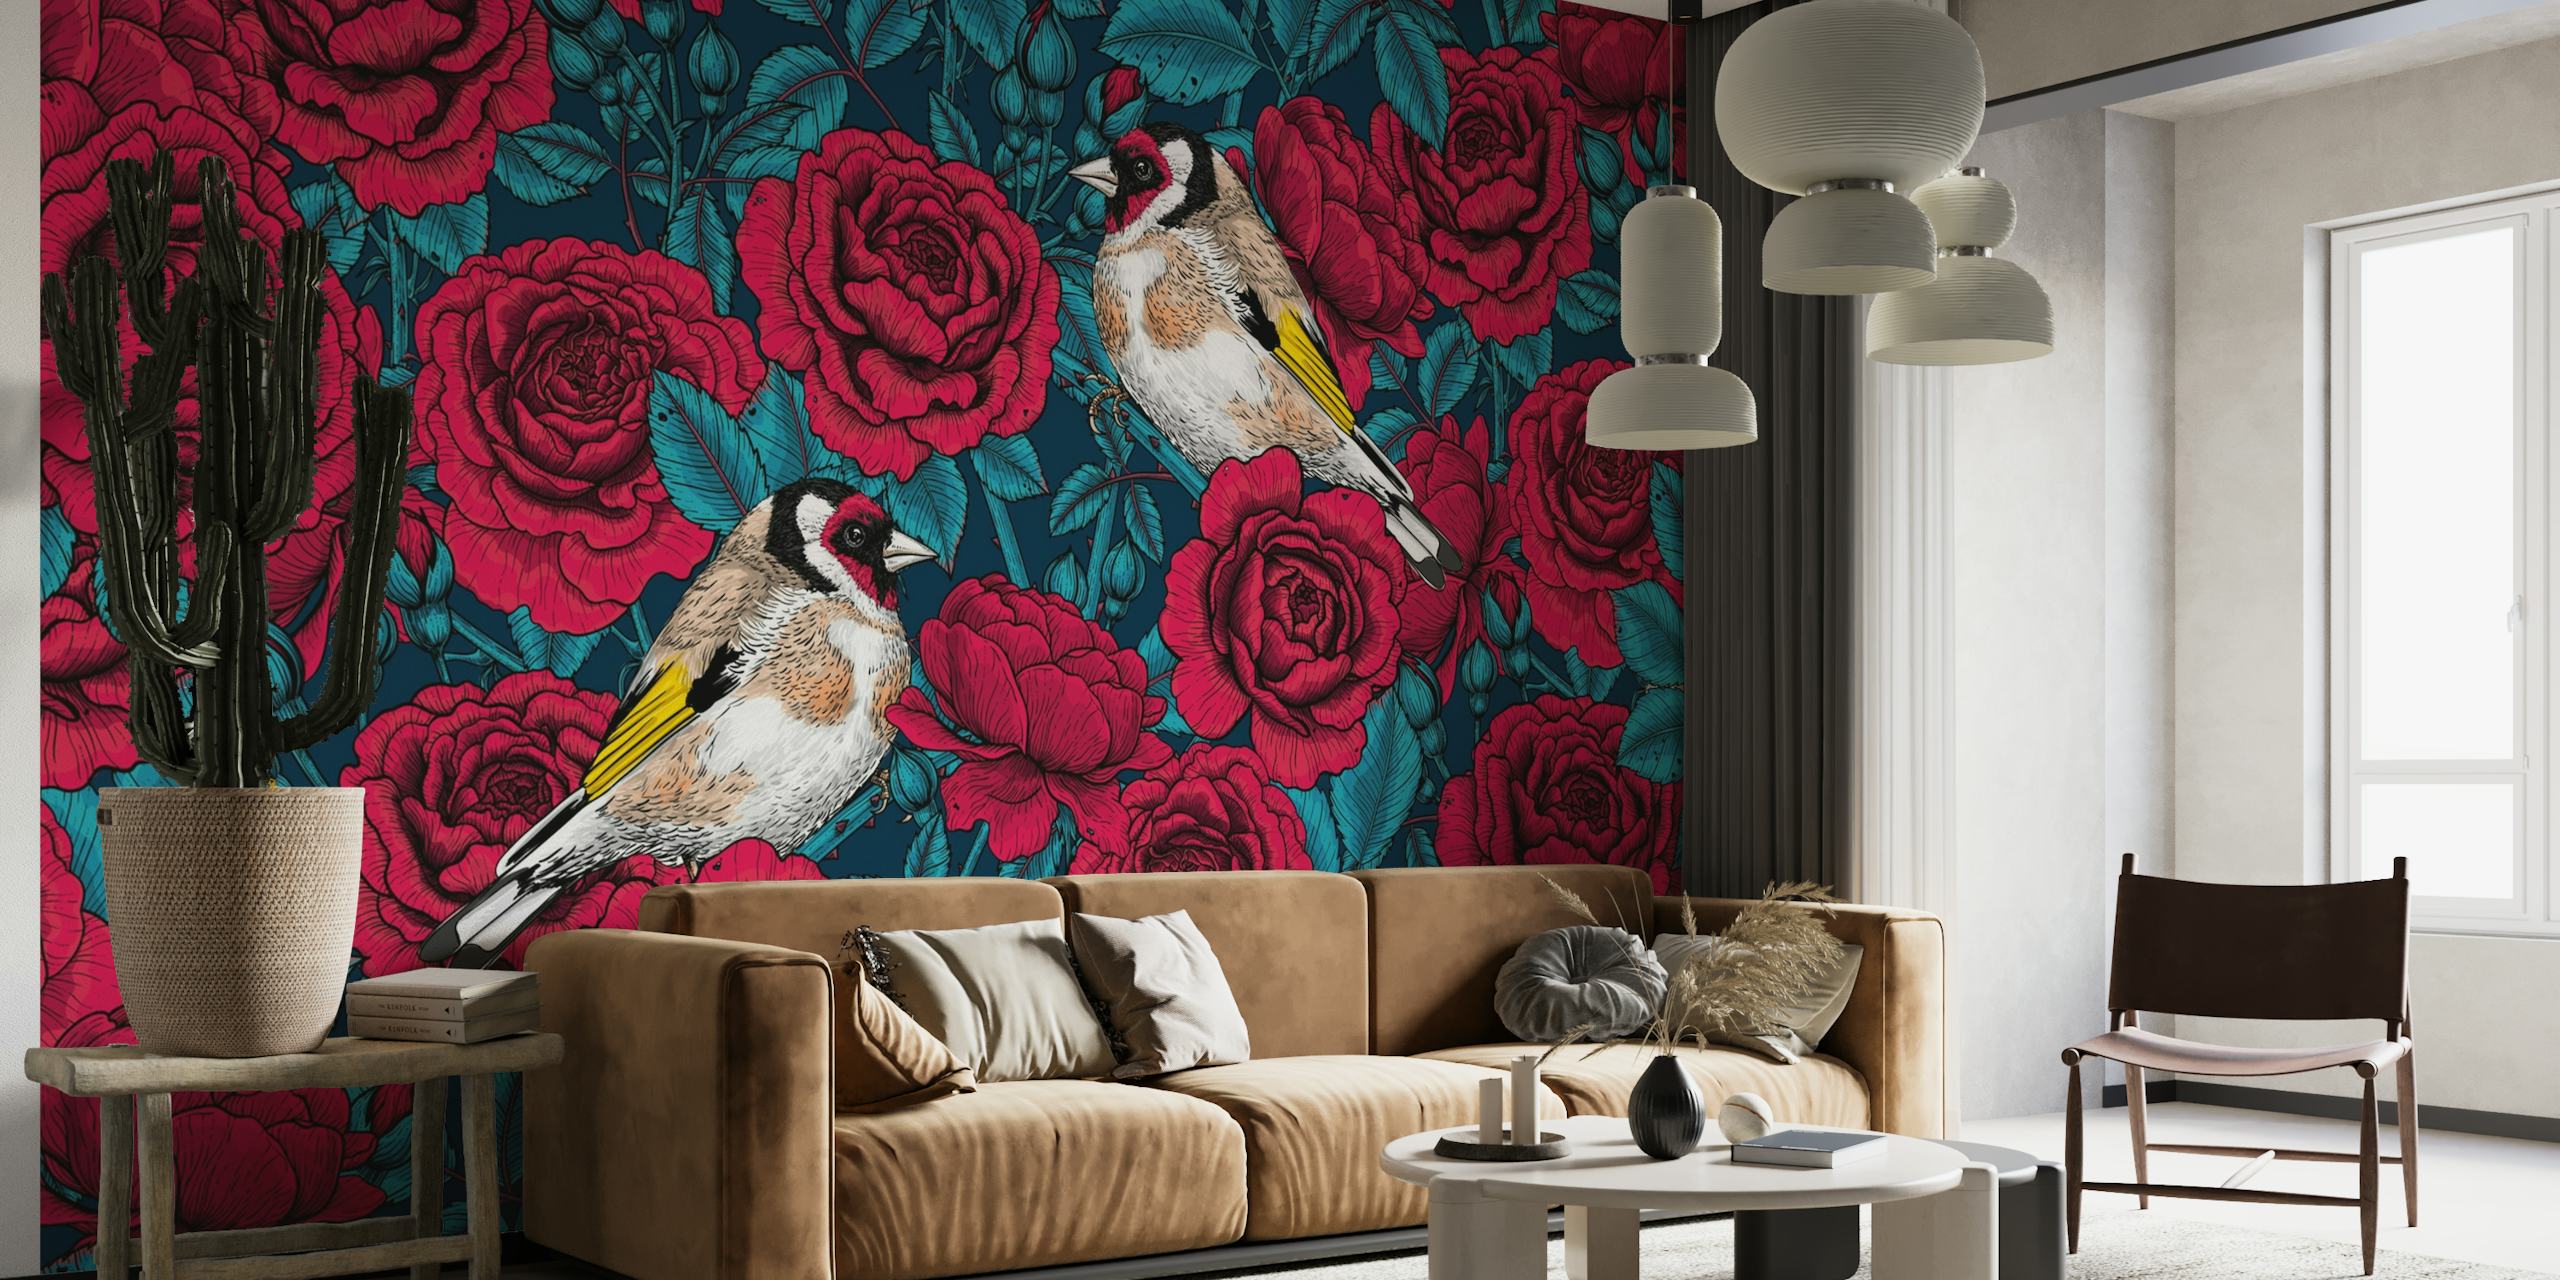 Red roses and birds wallpaper